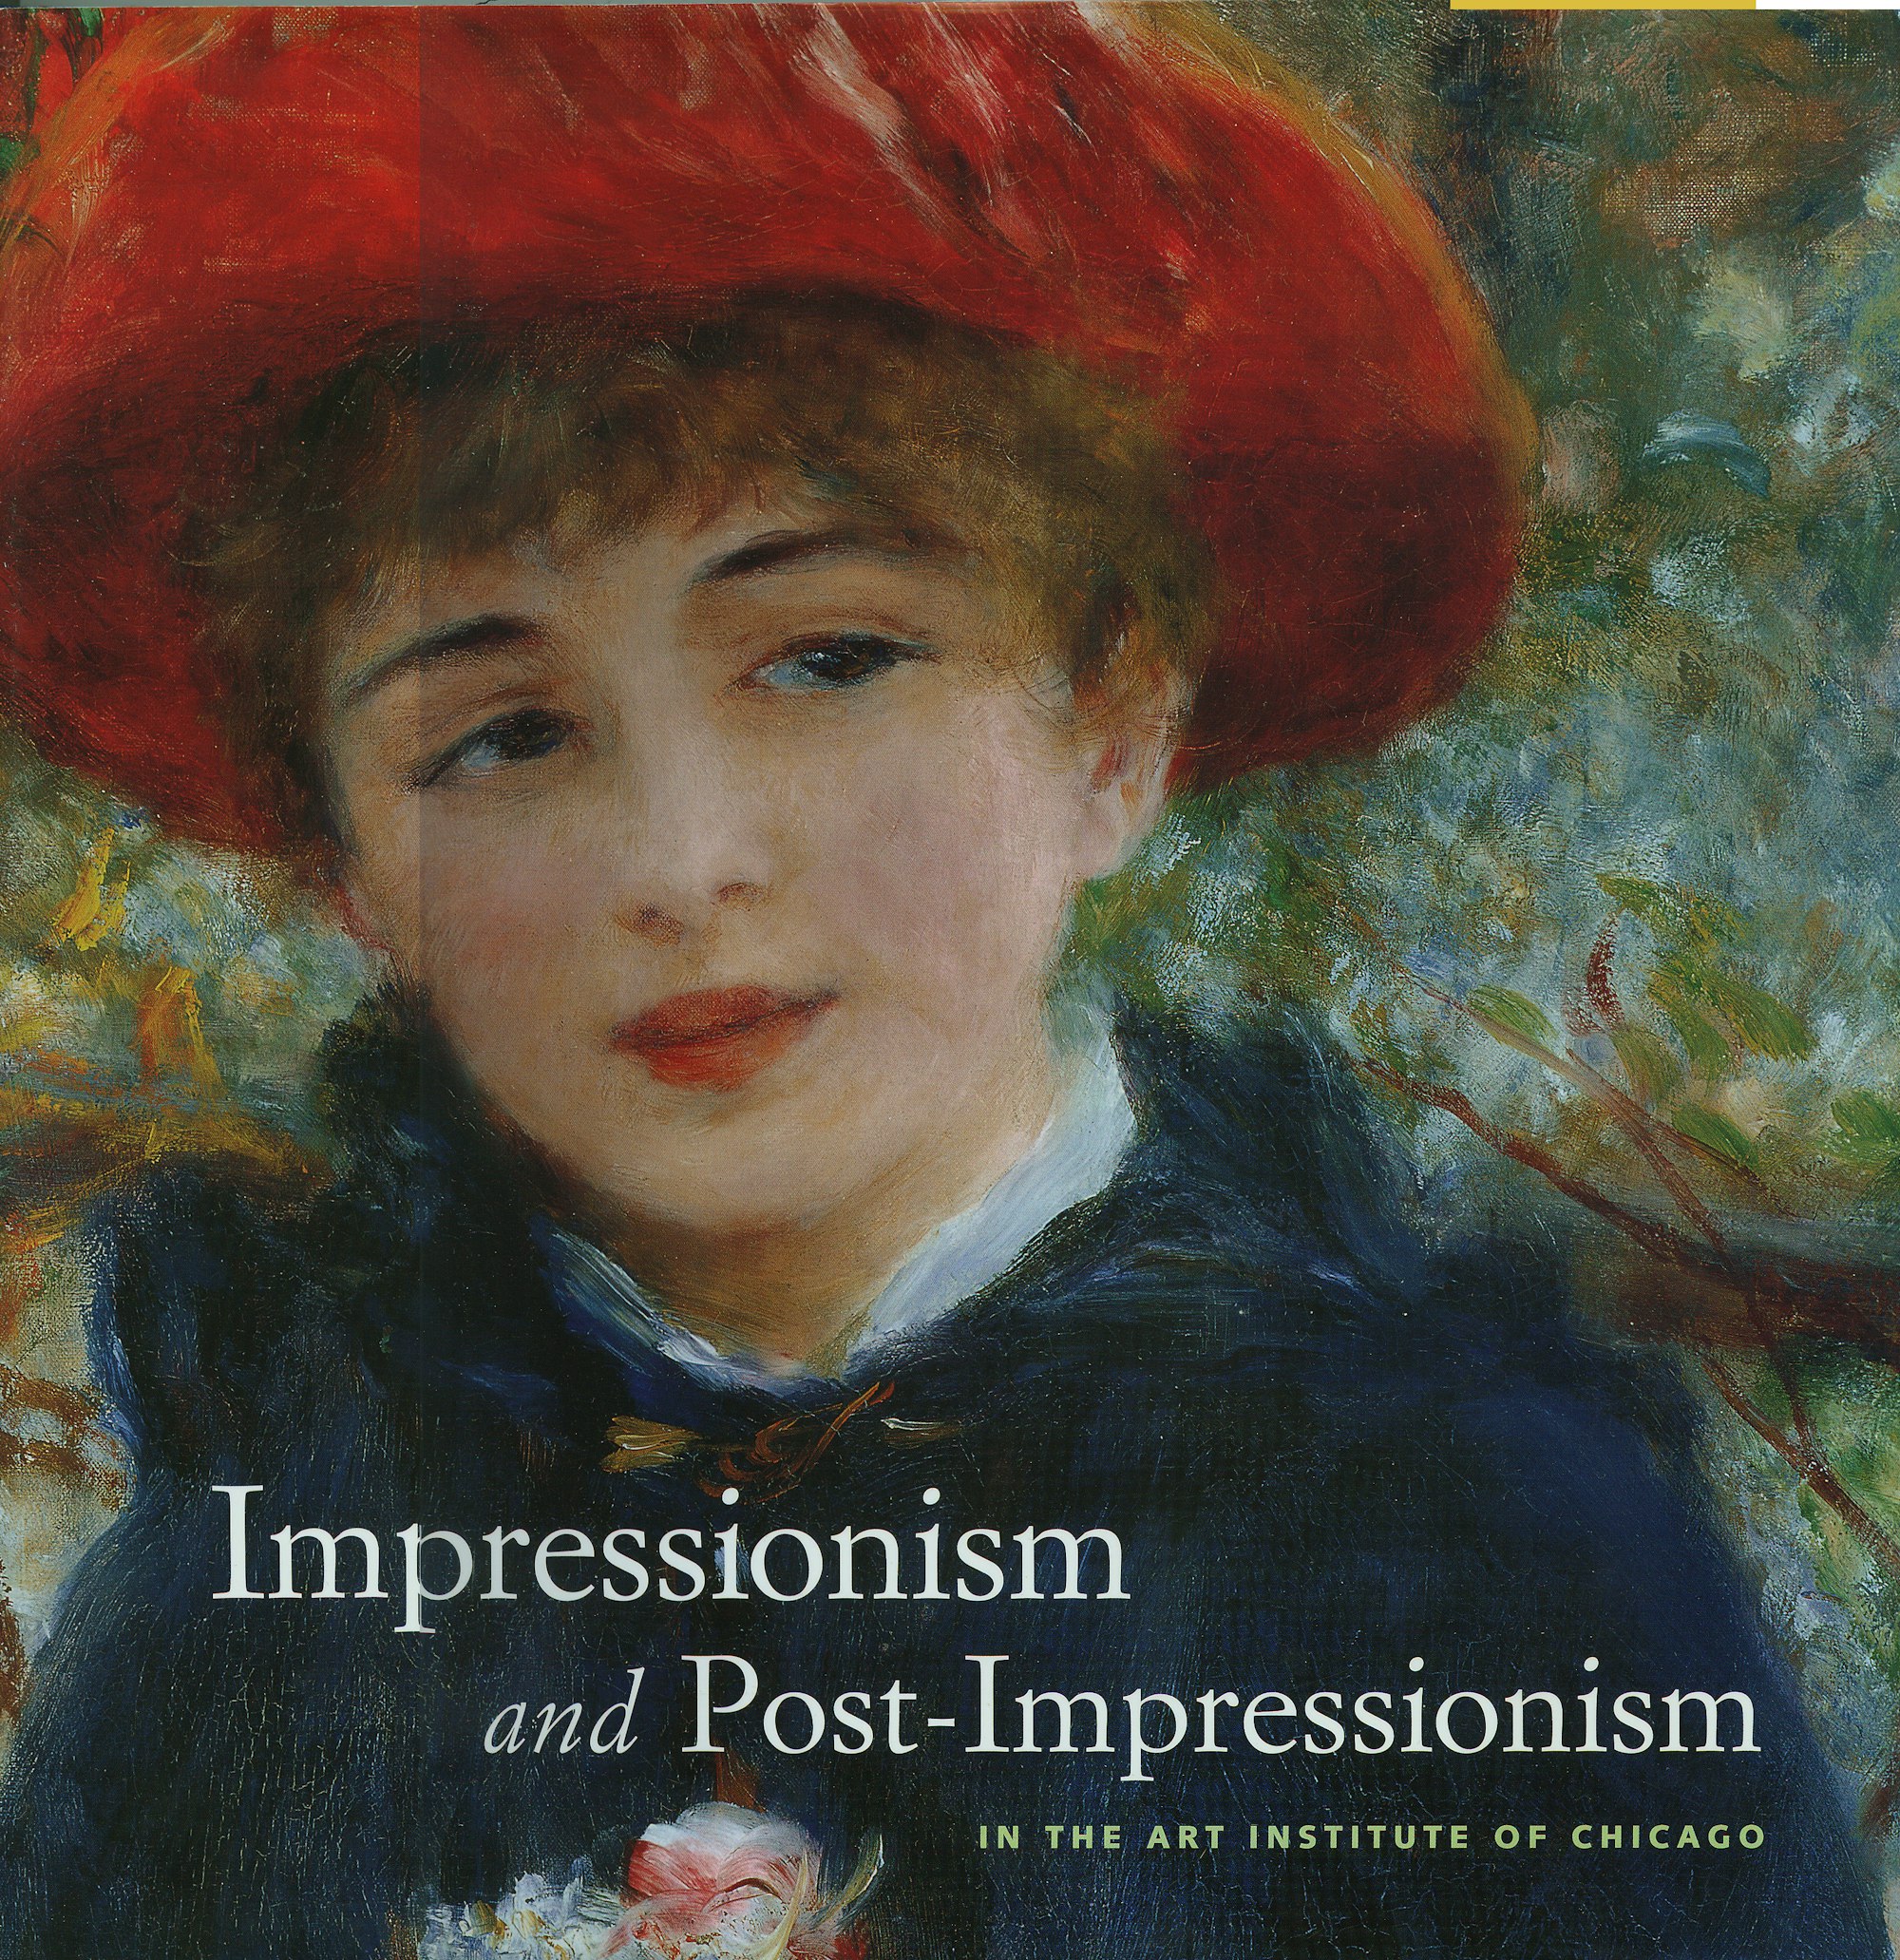 impressionism-and-post-impressionism-2023-day-to-day-calendar-the-metropolitan-museum-of-art